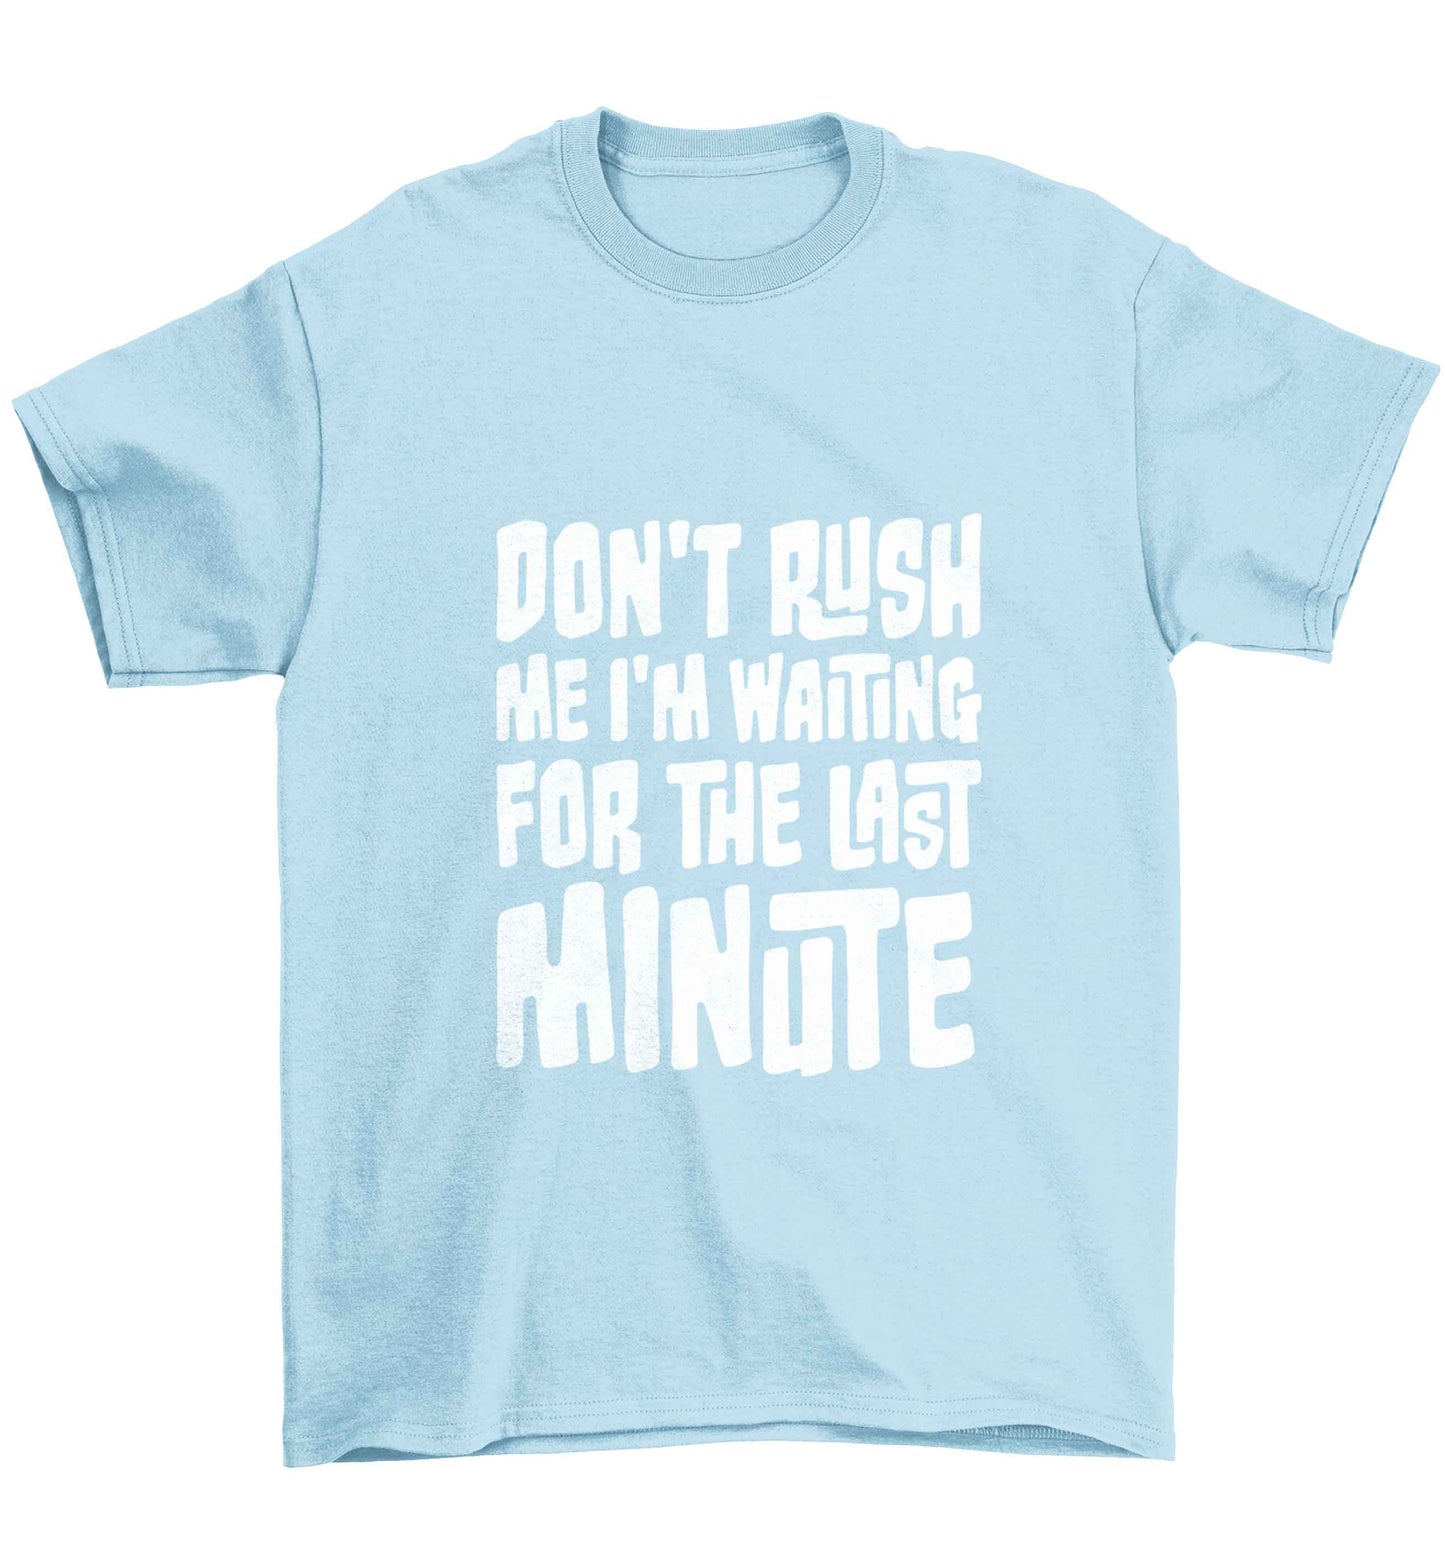 Don't rush me I'm waiting for the last minute Children's light blue Tshirt 12-13 Years